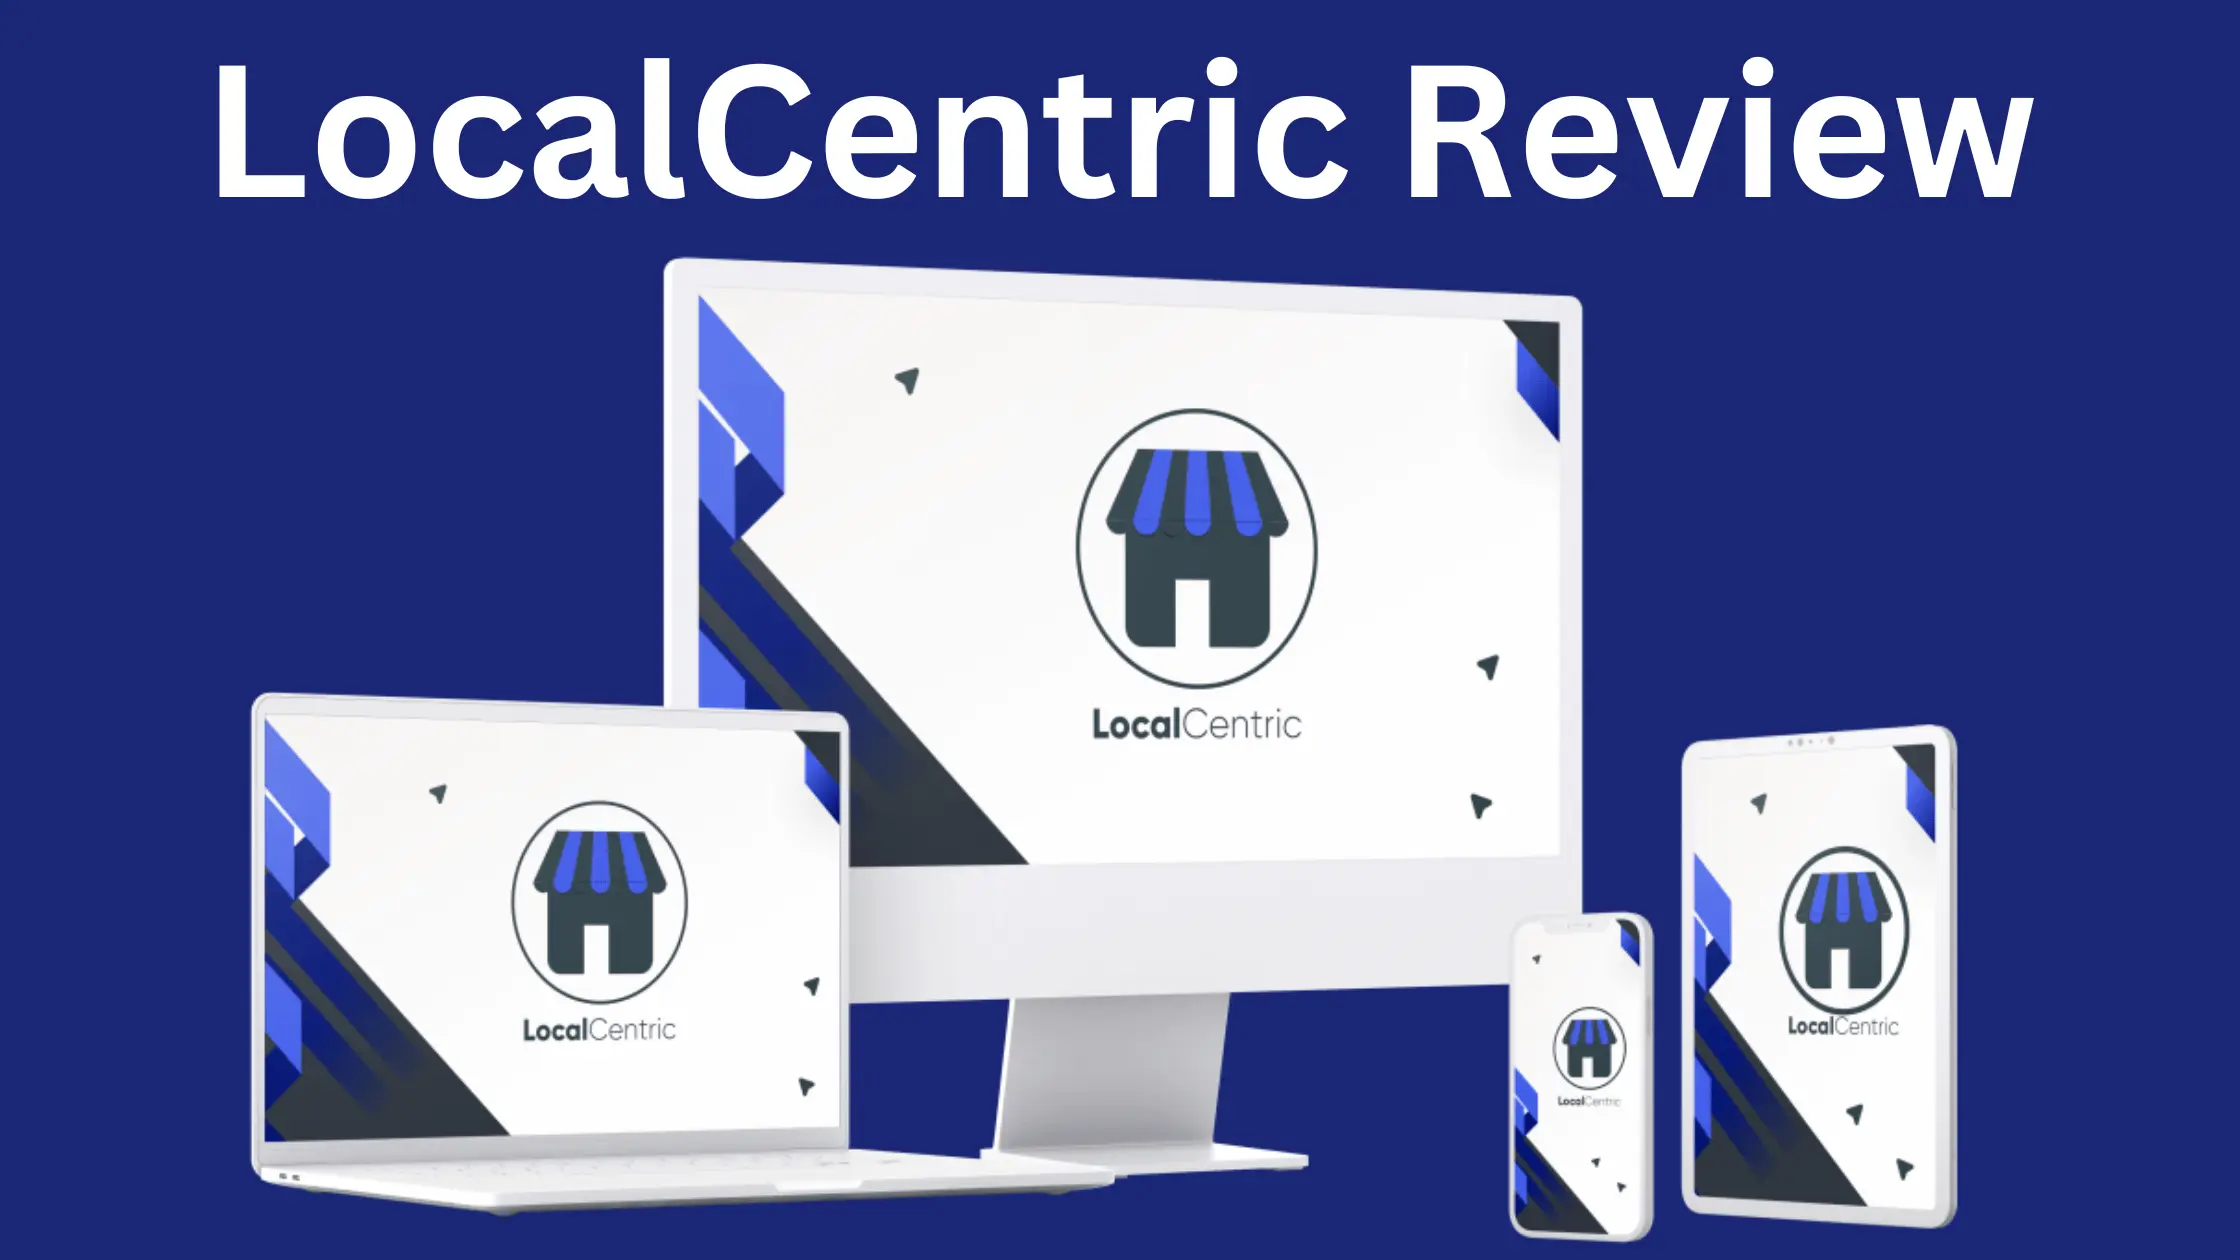 LocalCentric Review